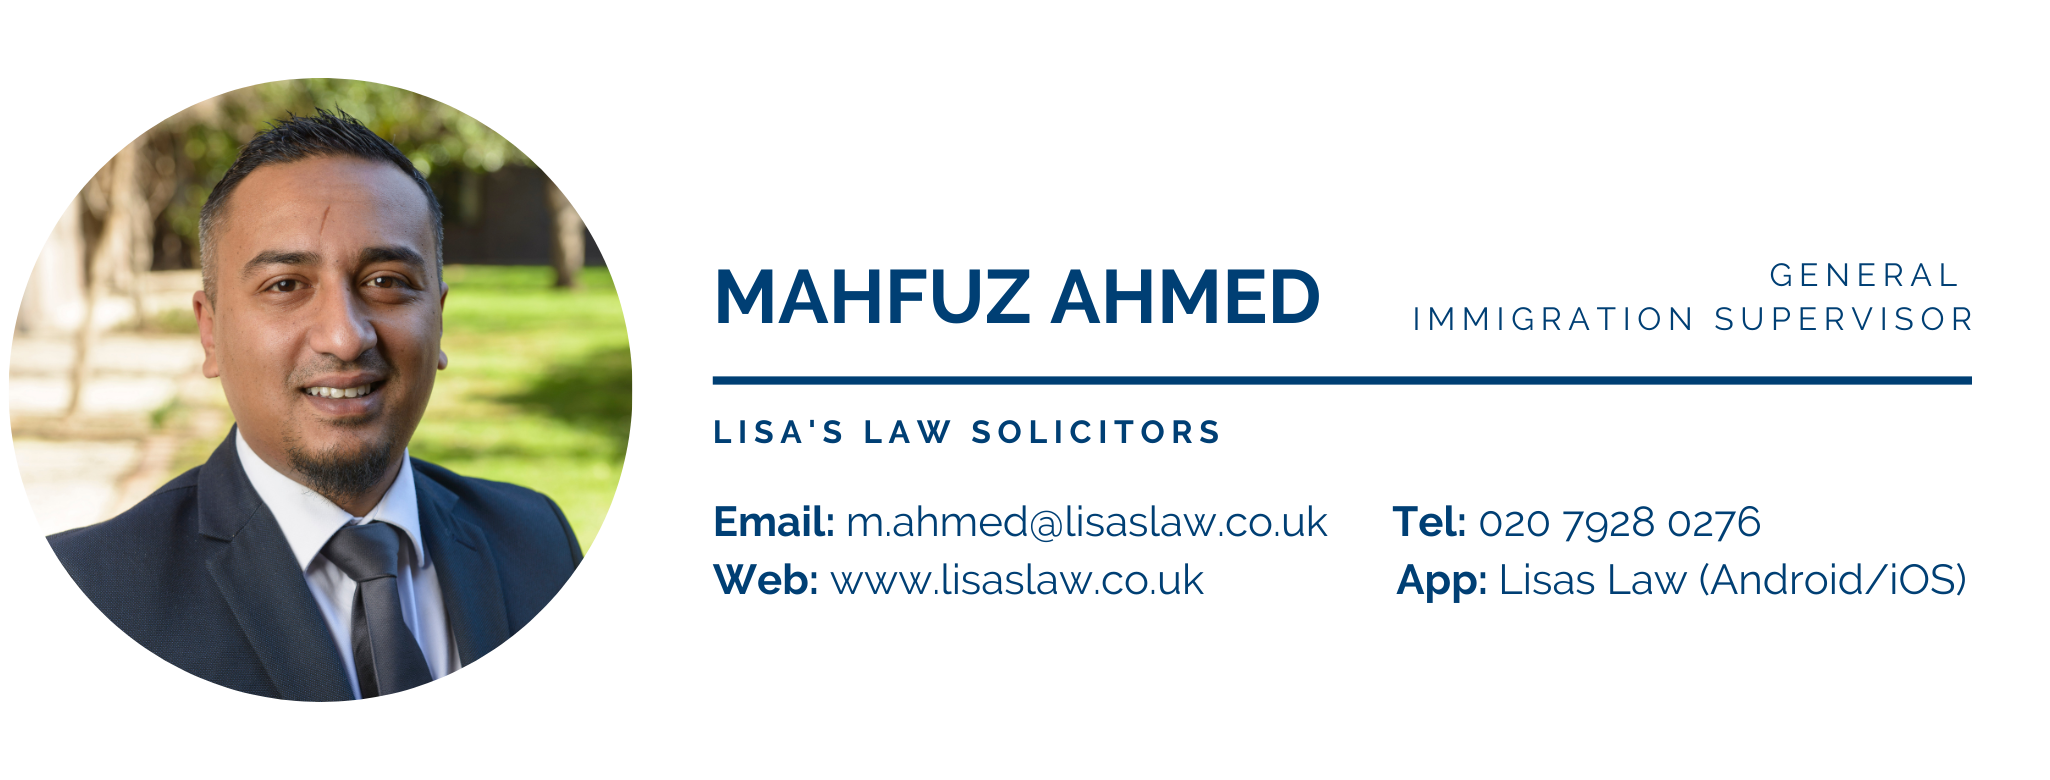 Home Office Secret Policy Exposed by High Court - written by Mahfuz from Lisa's Law